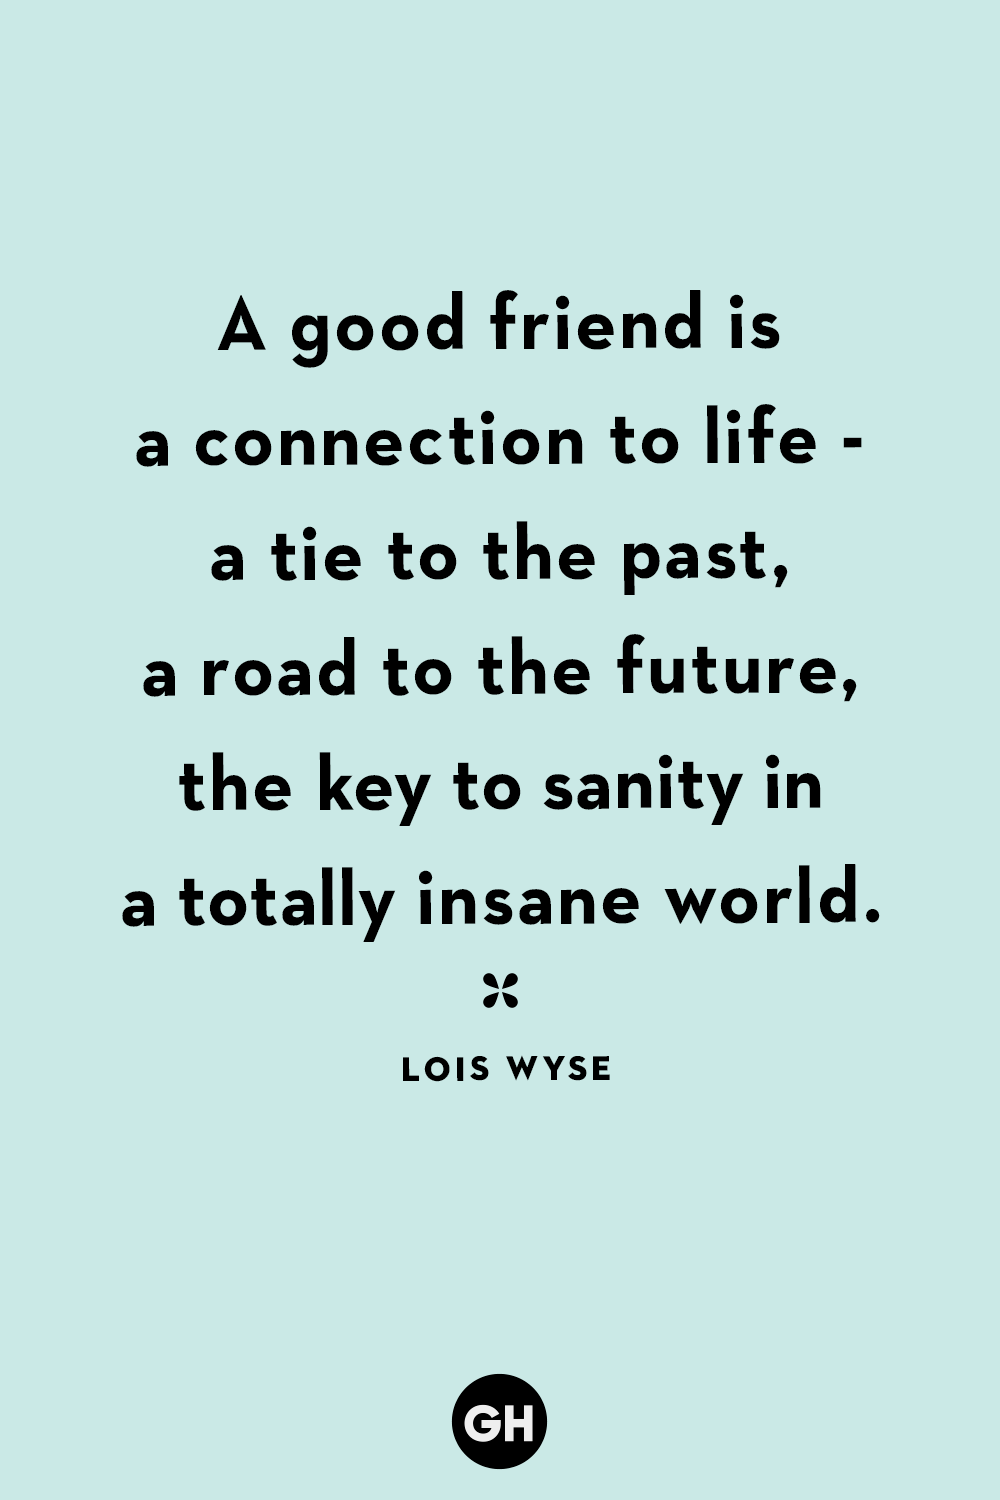 beautiful friendship quotes and sayings